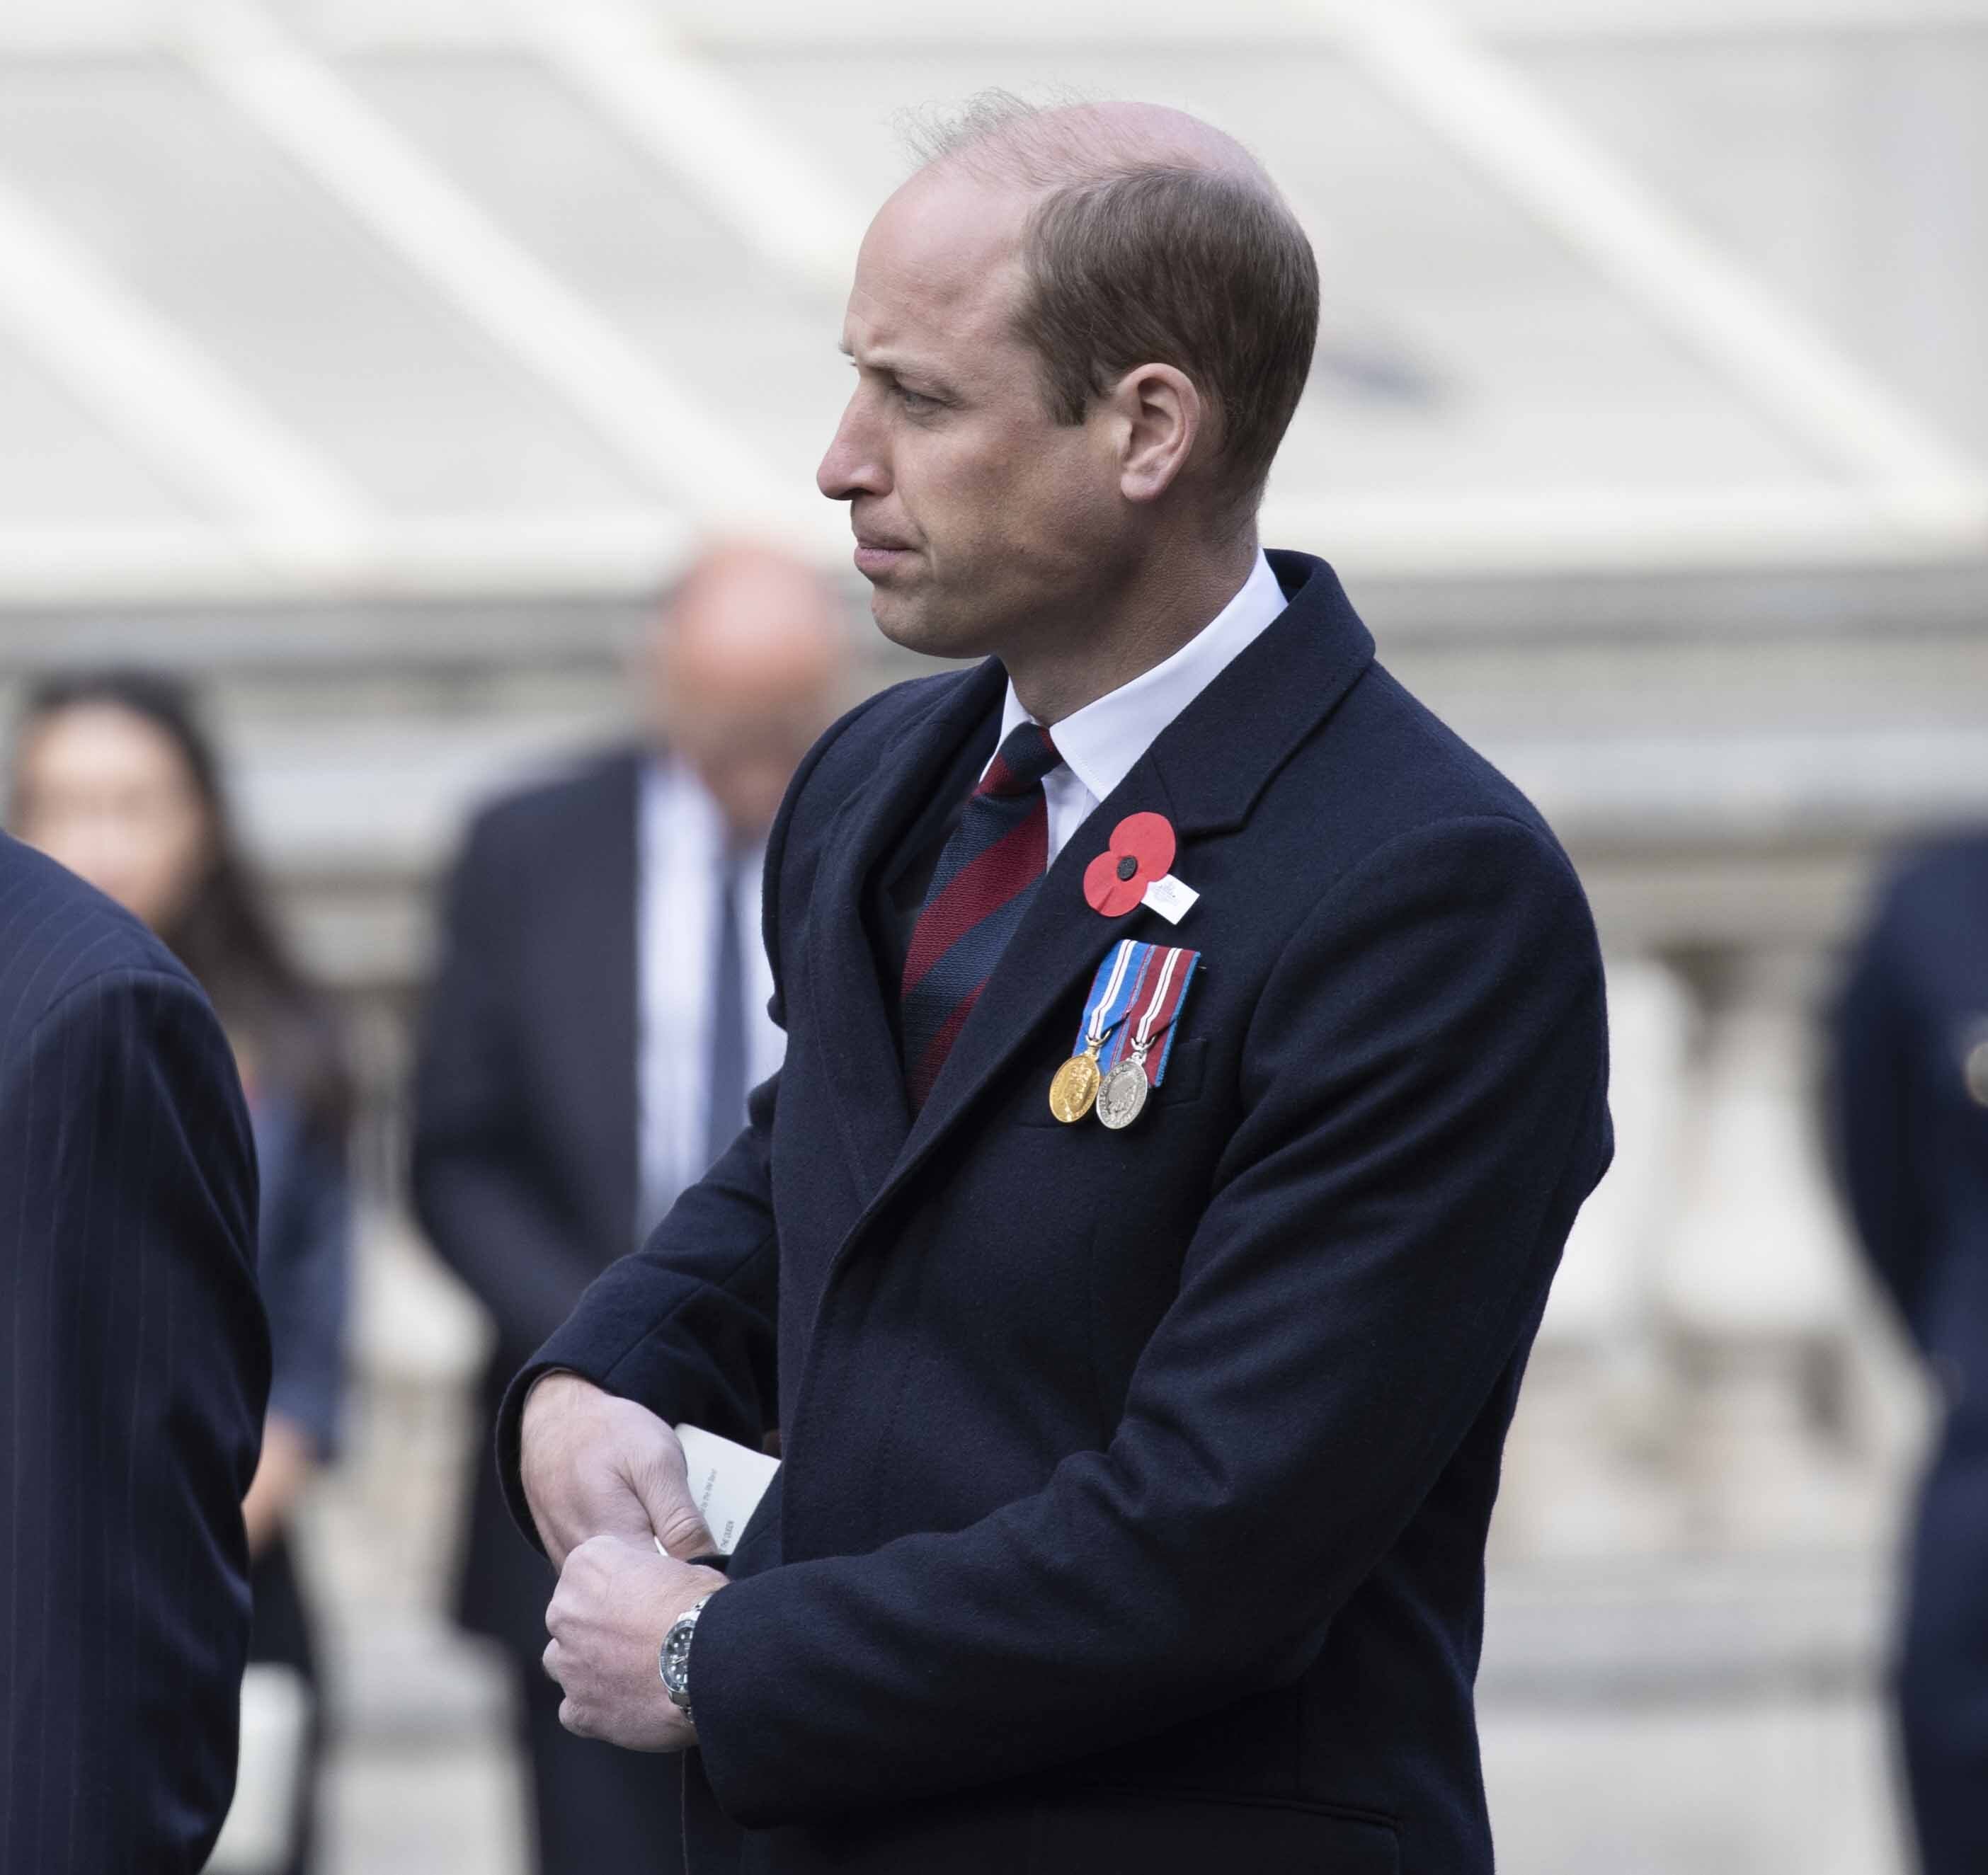 Duke of Cambridge Prince William and his wife Duchess Kate Middleton attend the ANZAC (Australian and New Zealand Army Corps) Day in London, April 25, 2022 | Source: Getty Images